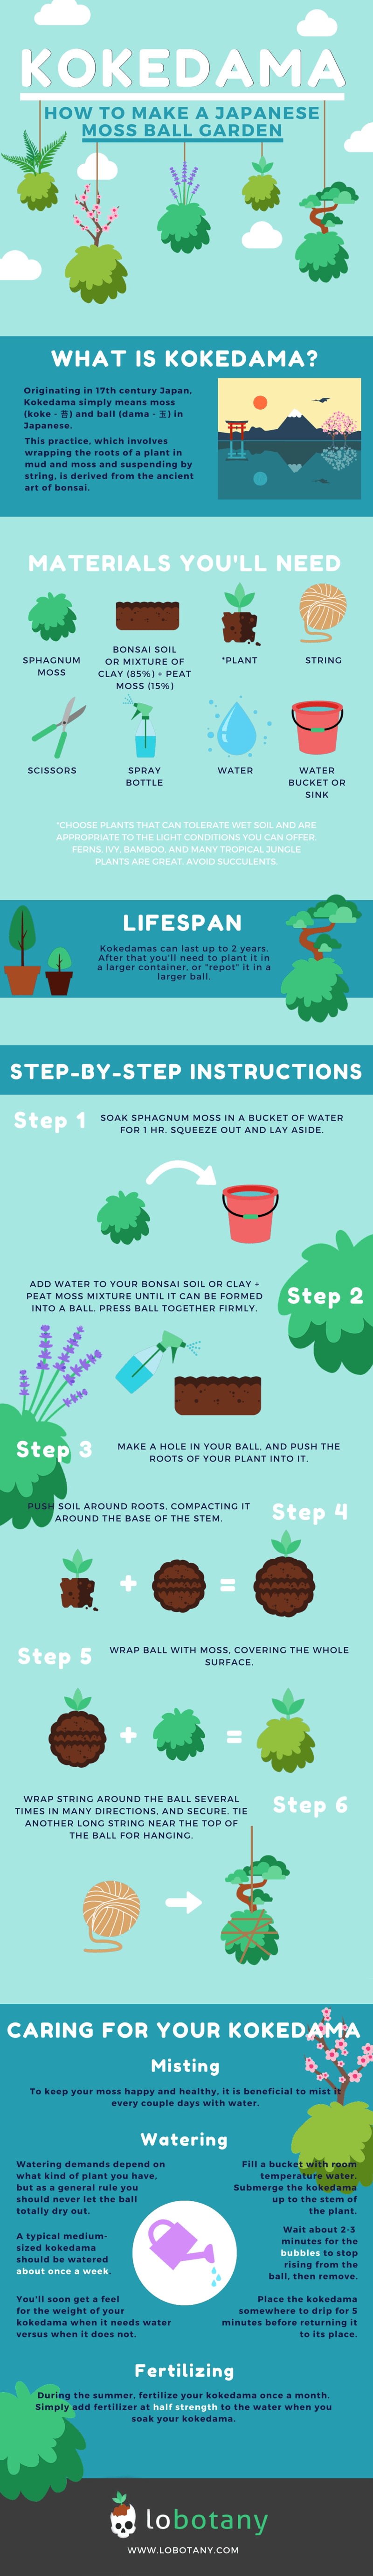 Learn to make a Japanese moss ball garden that is eye-catching and unique and not only this, it is easy to make and maintain too if you follow the steps correctly!